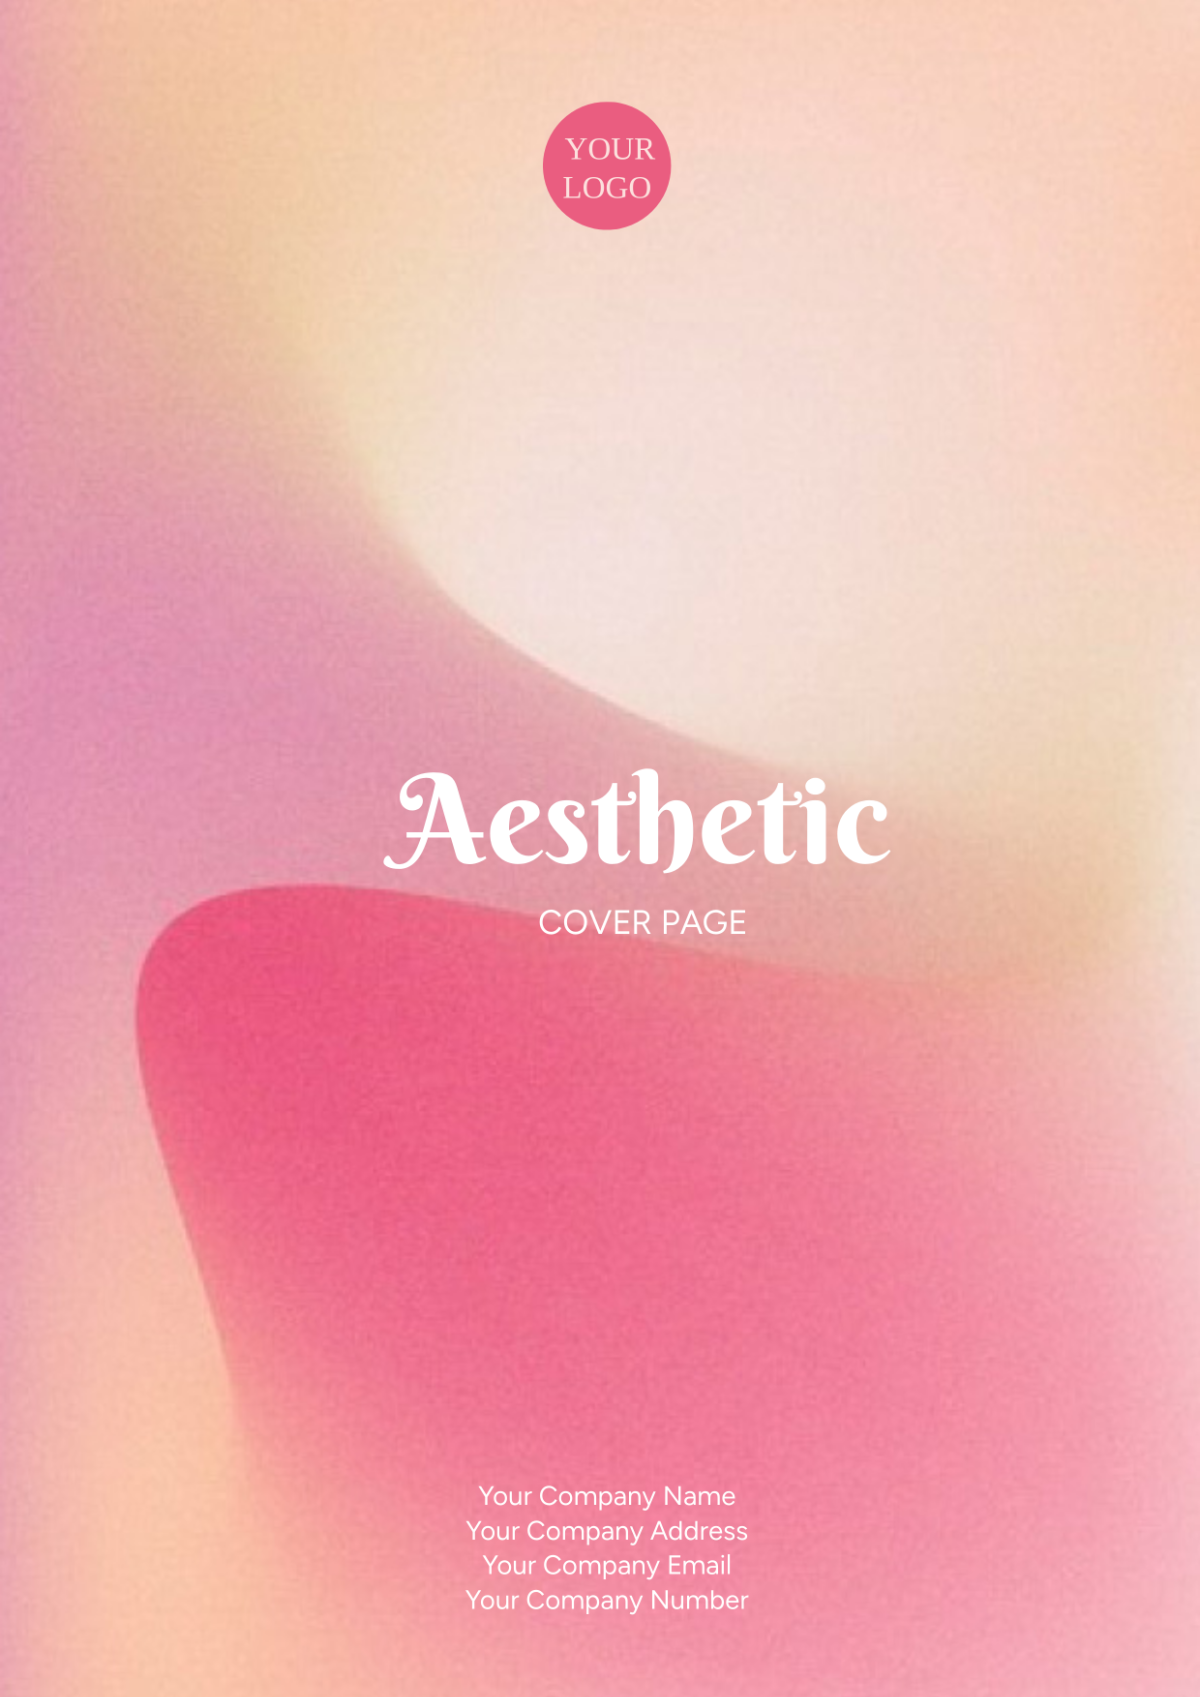 Aesthetic Cover Page Image